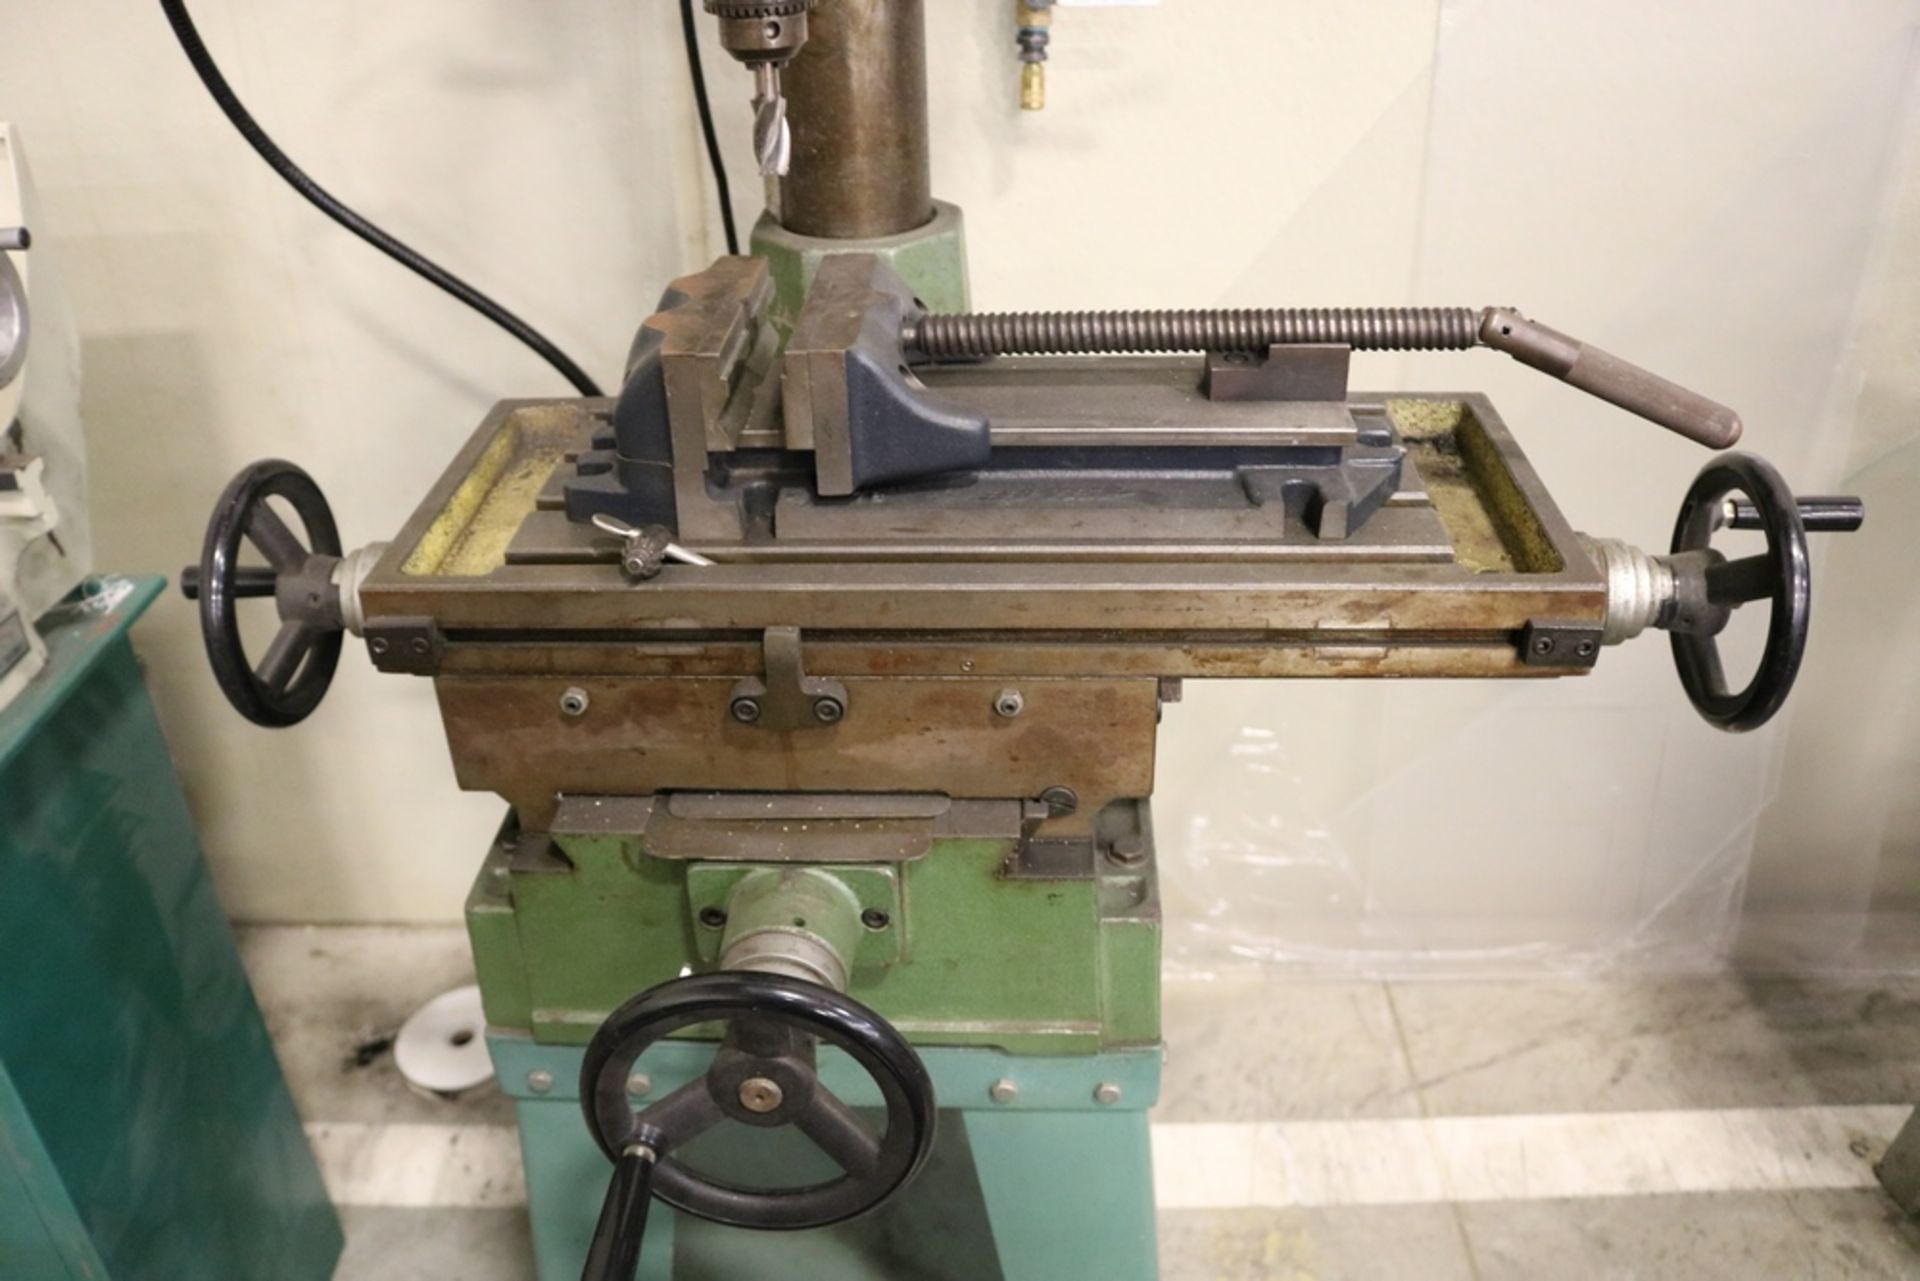 Jet 12 Speed Drilling & Milling Machine Jet-16 1HP 1 Phase Jacob Chuck 6" Speed Vise on Stand - Image 3 of 8